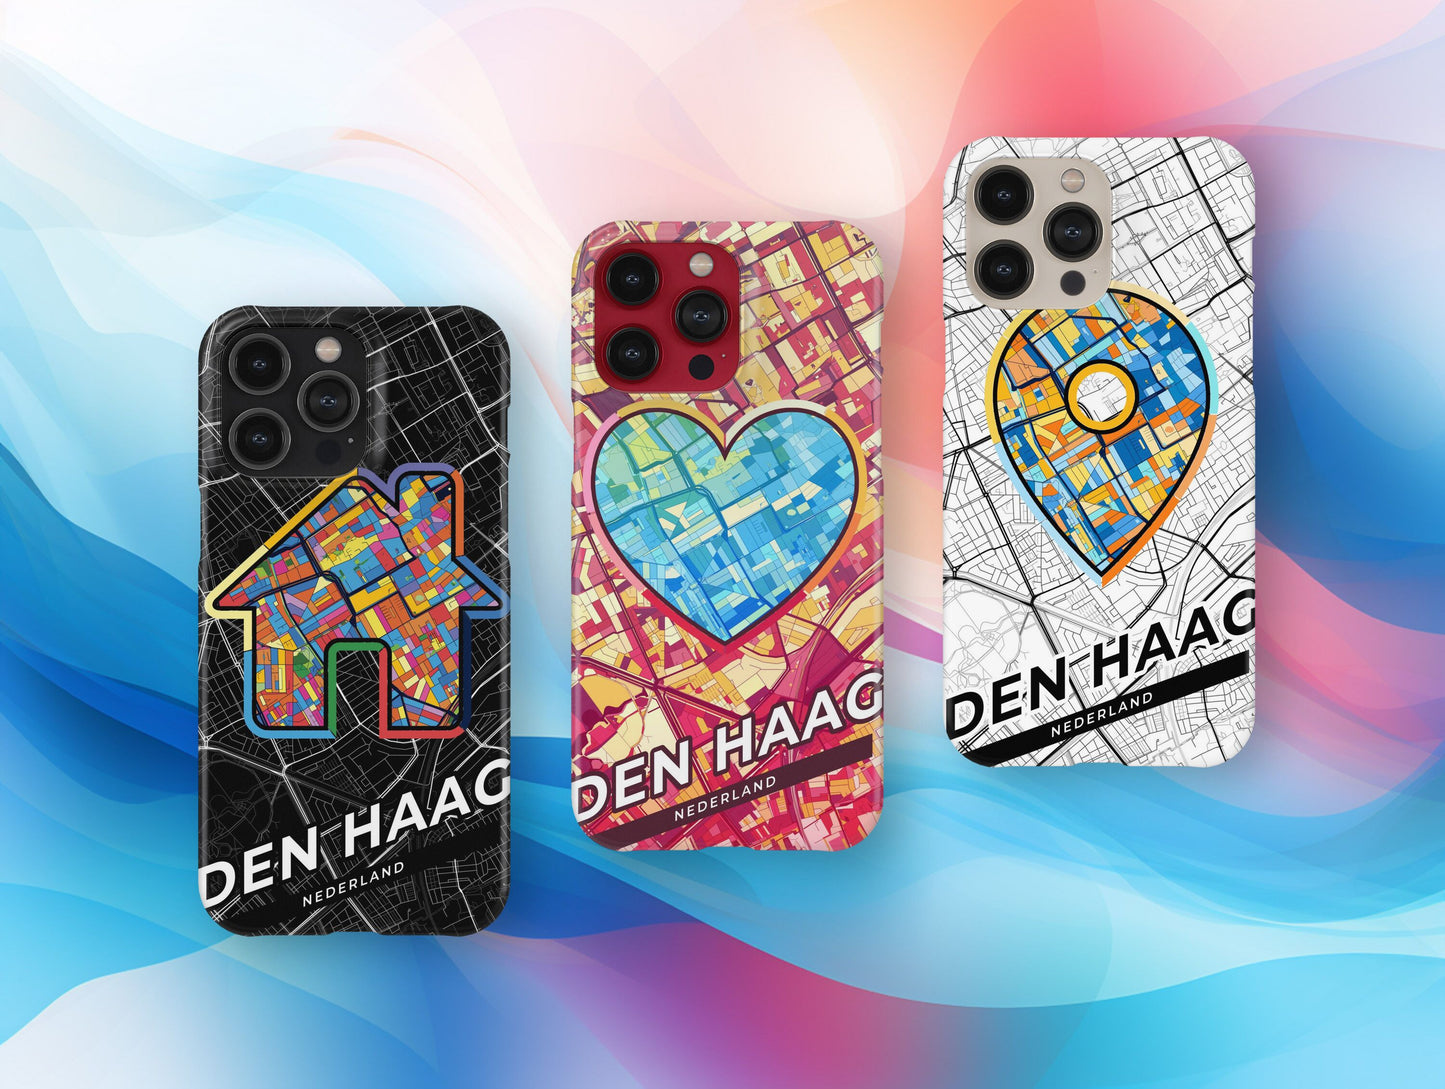 The Hague Netherlands slim phone case with colorful icon